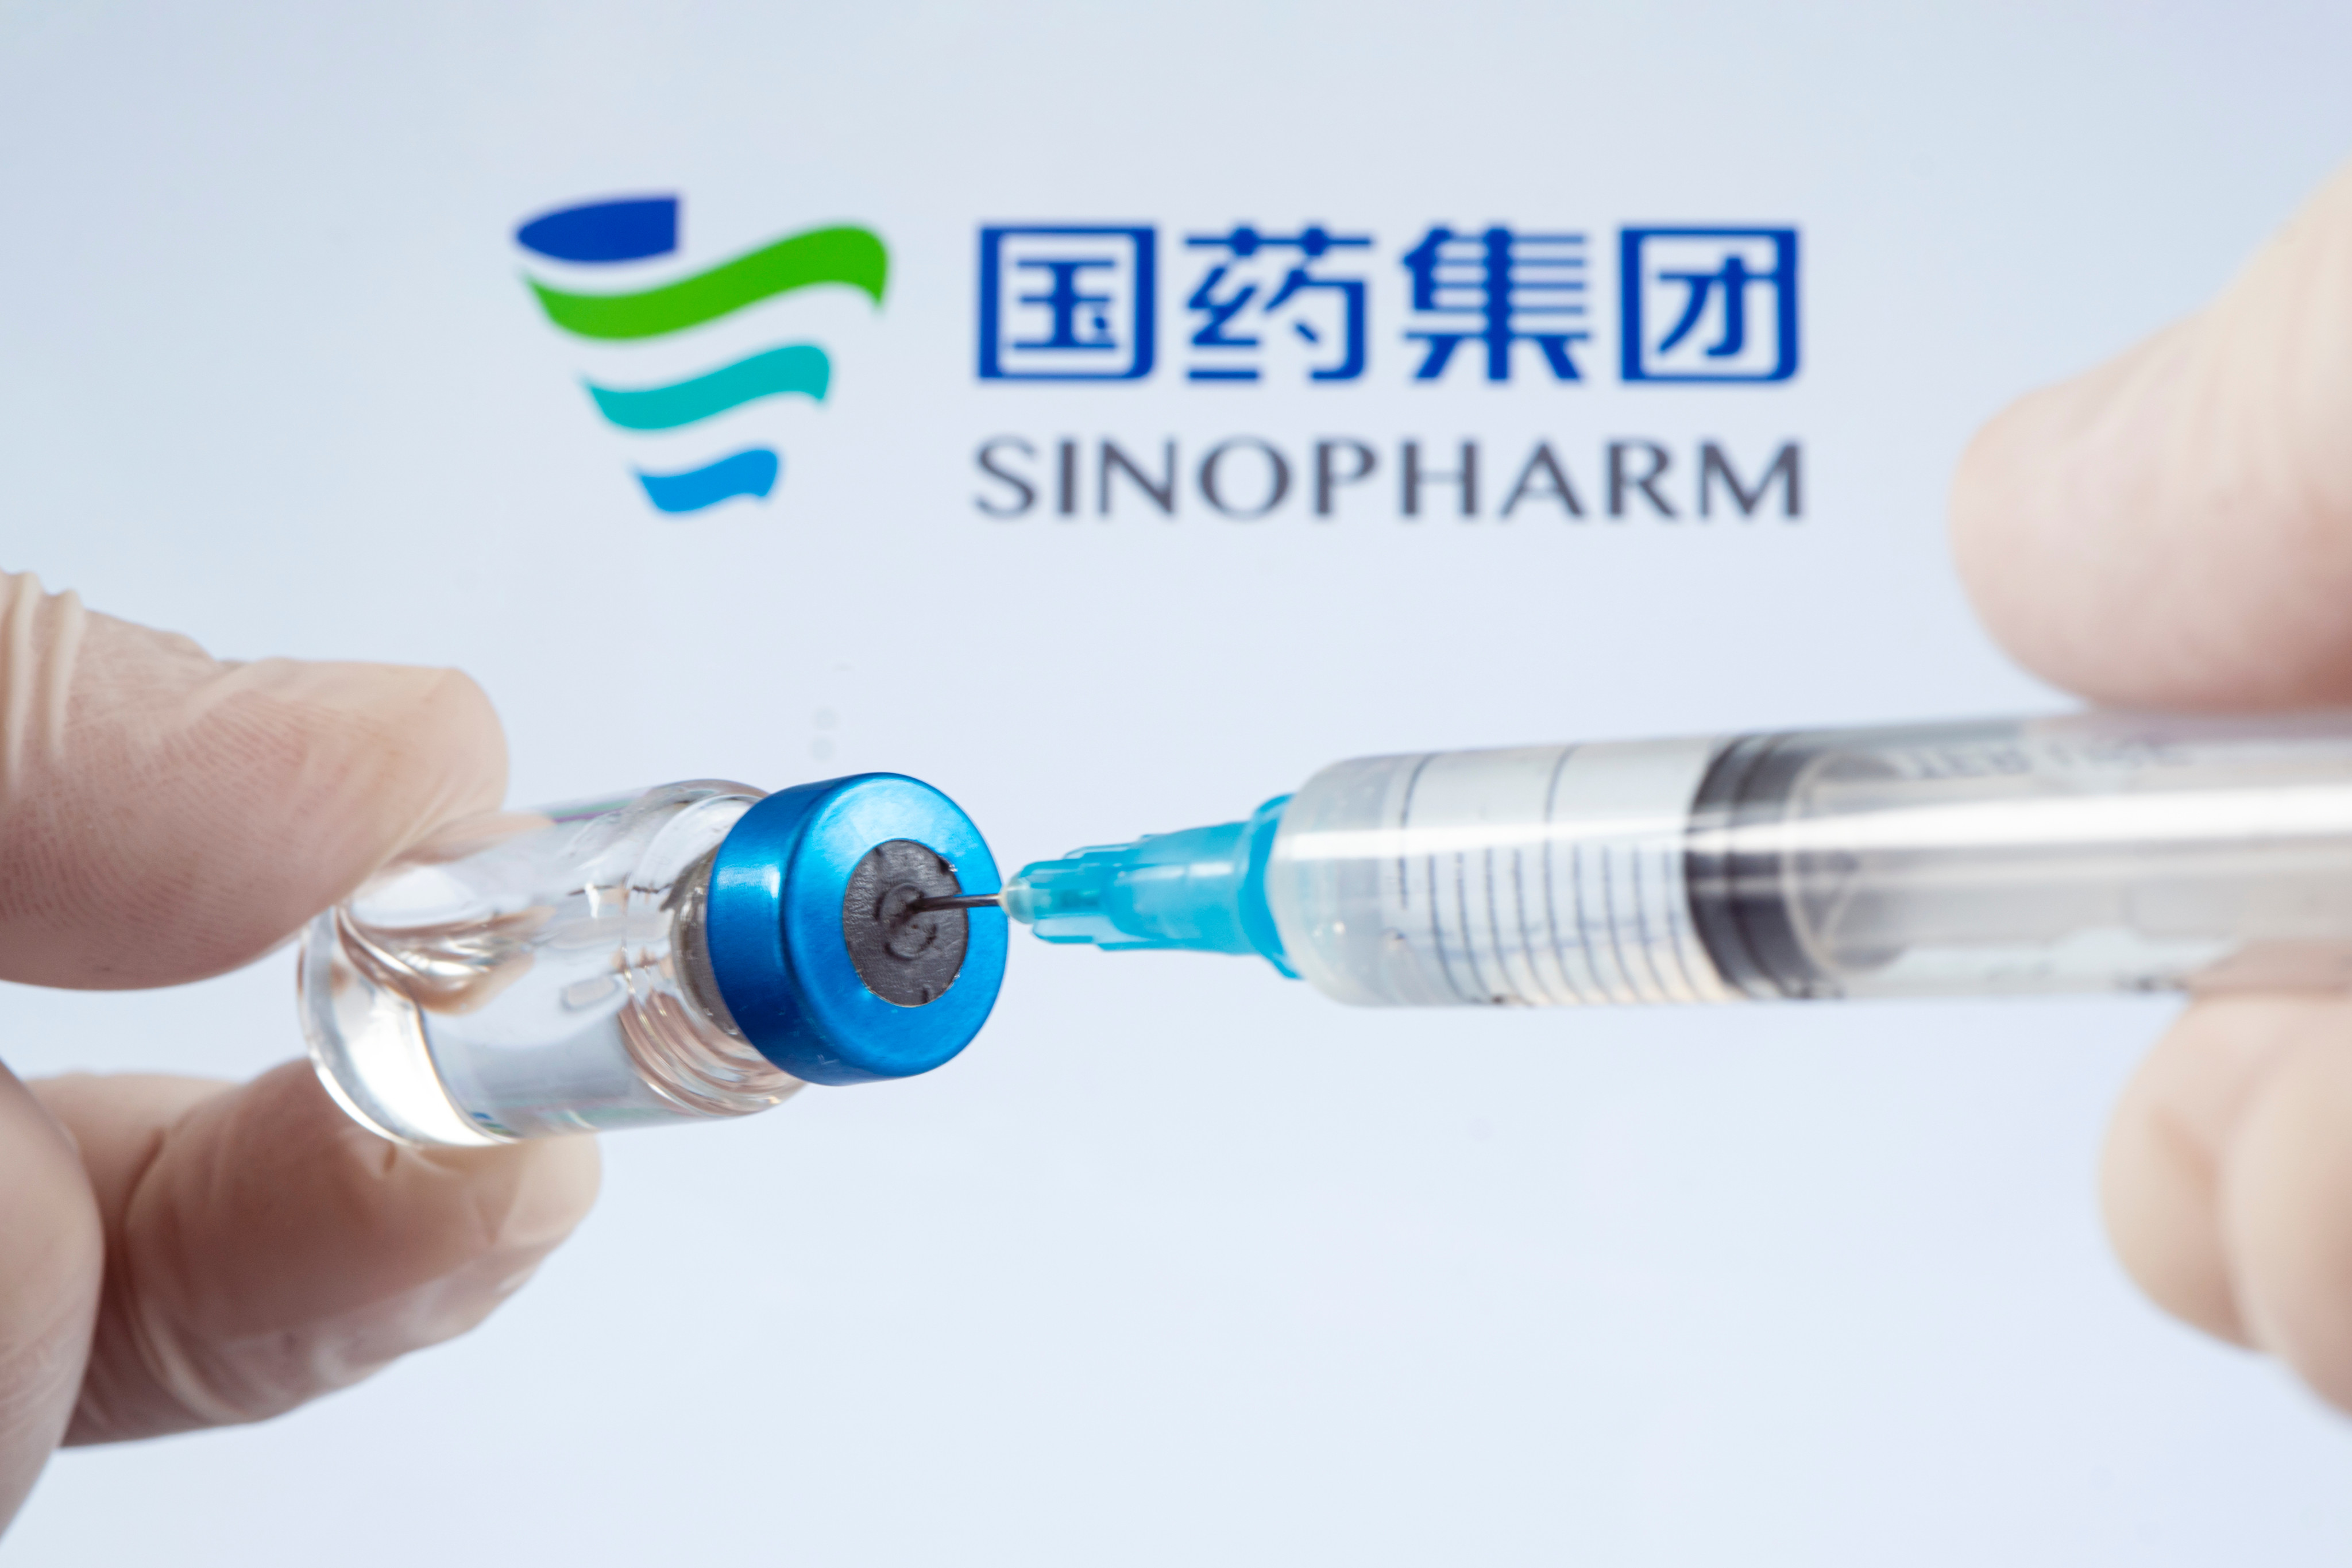 Sinopharm’s NVSI-06-07 protein-based vaccine was approved for emergency use as a booster in the United Arab Emirates in December. Photo: Shutterstock 